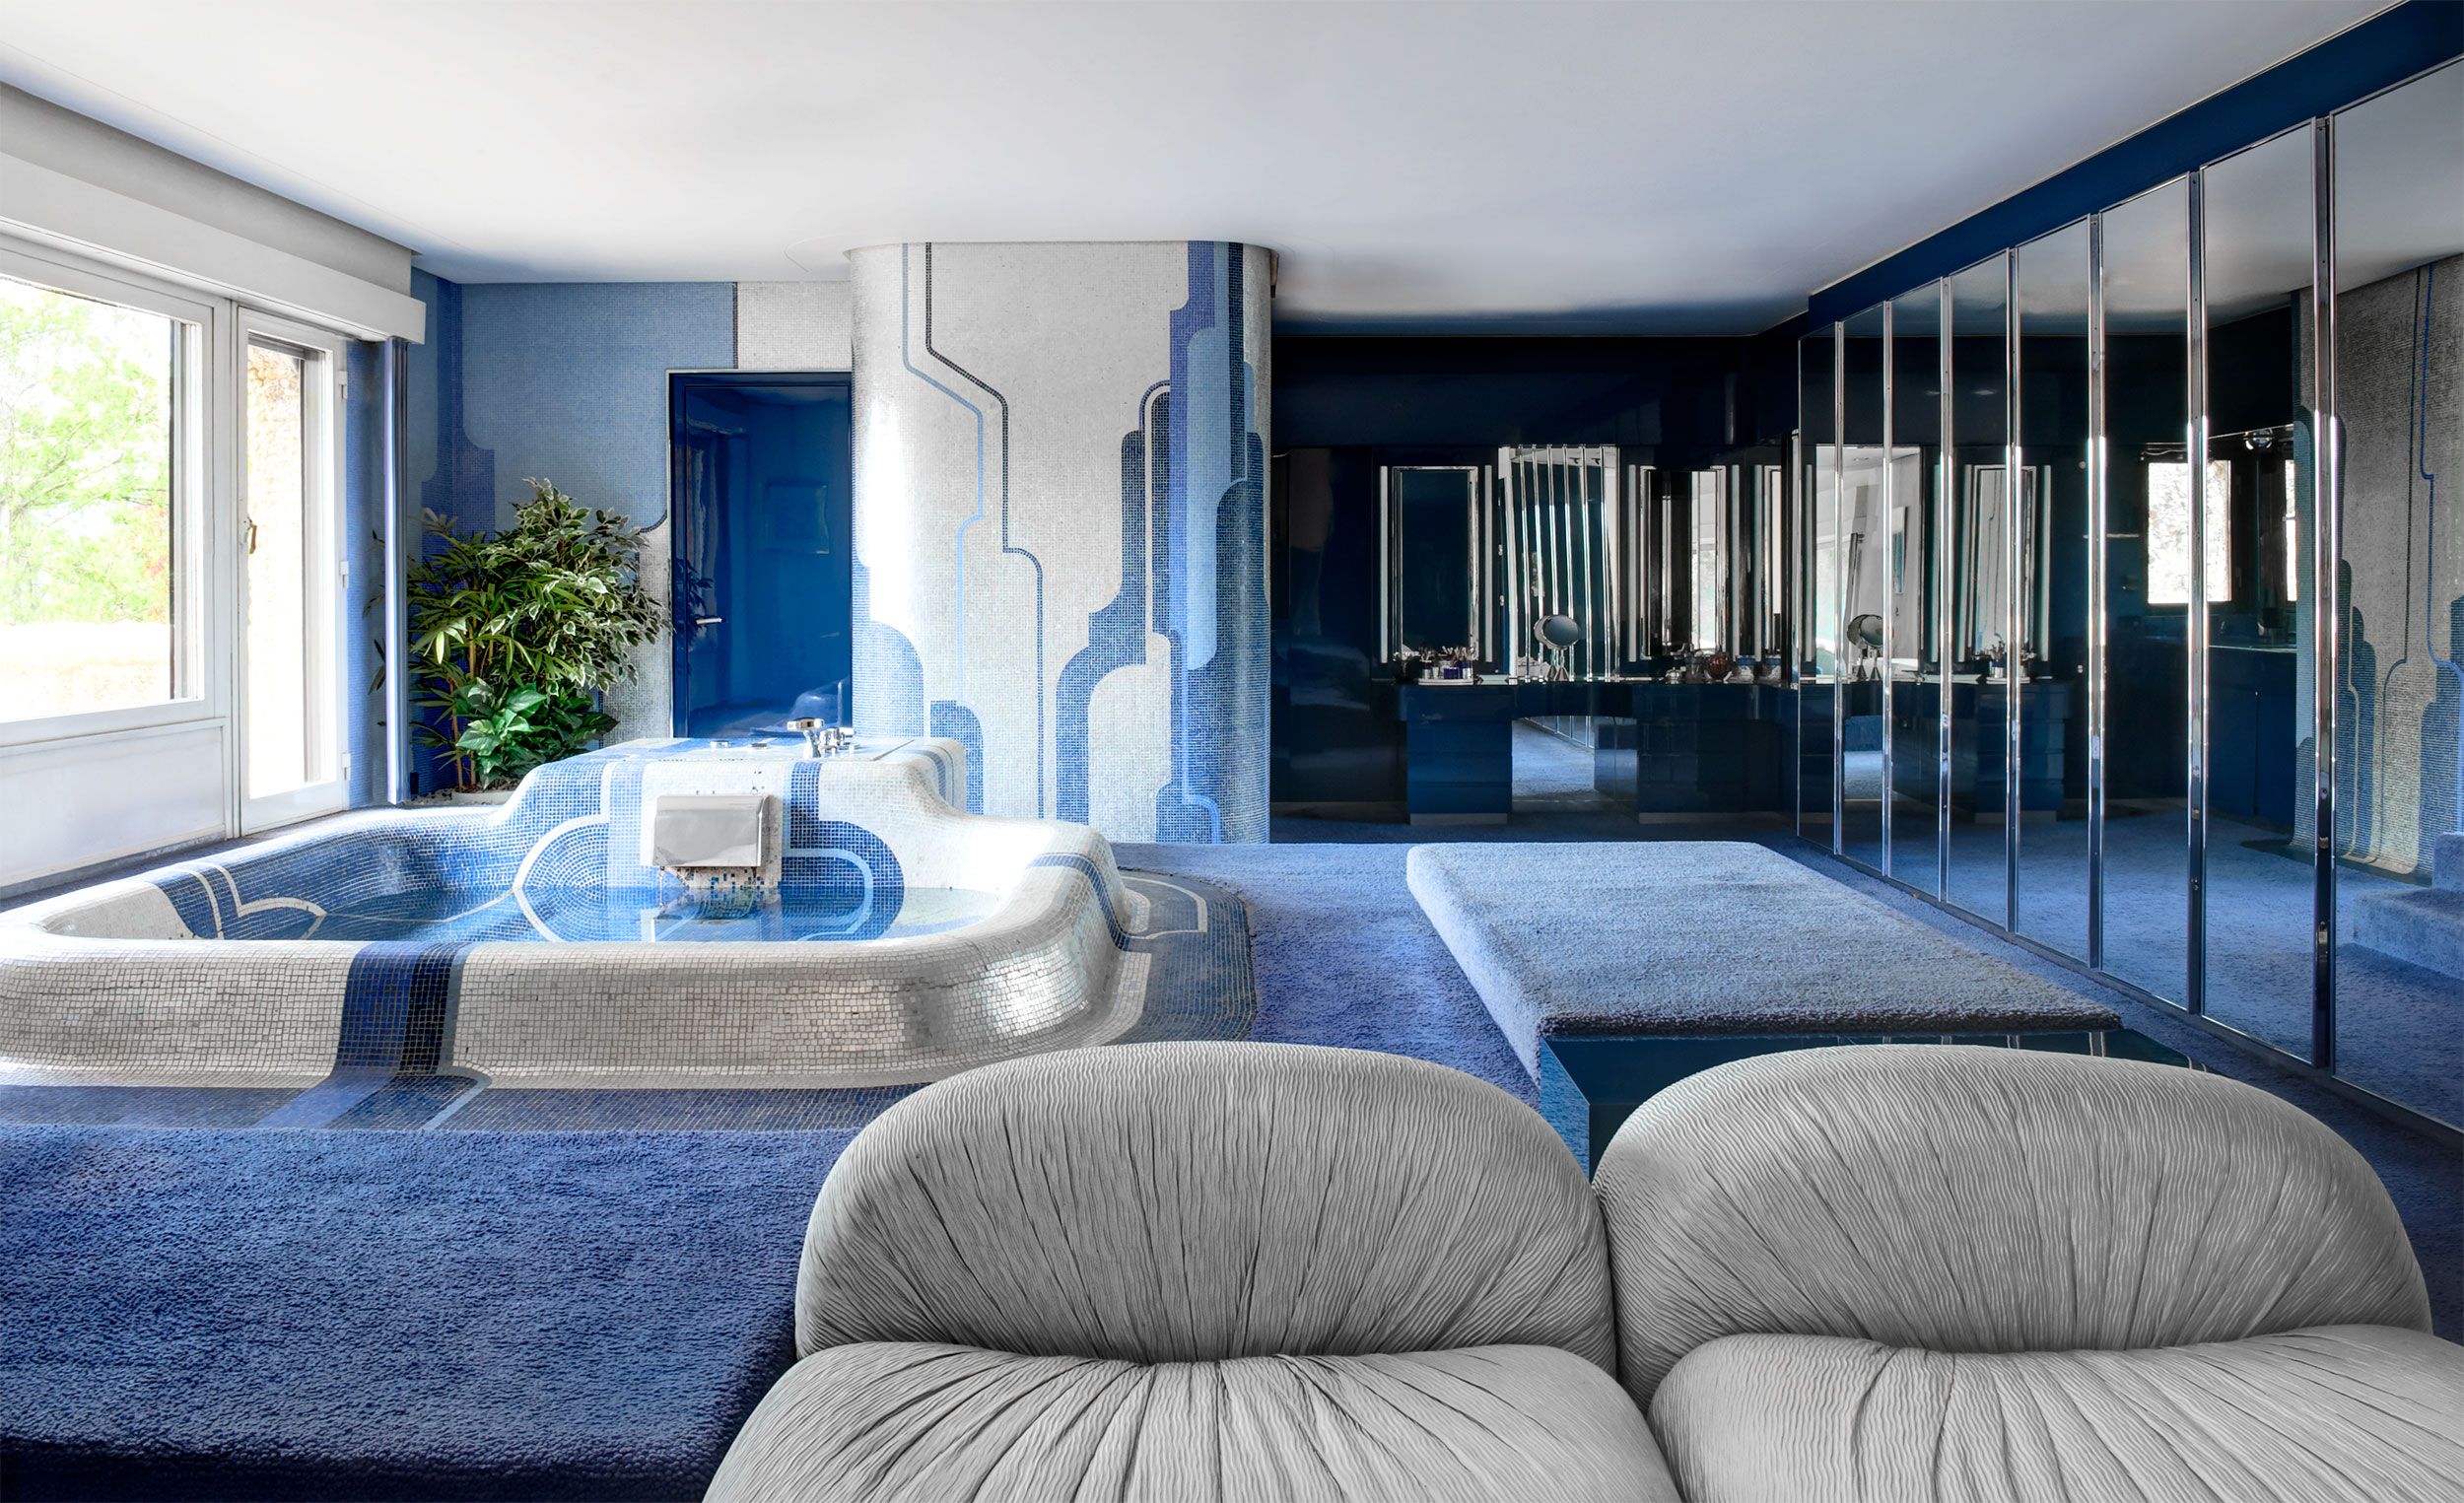 Why Home Spas Are All the Rage Right Now